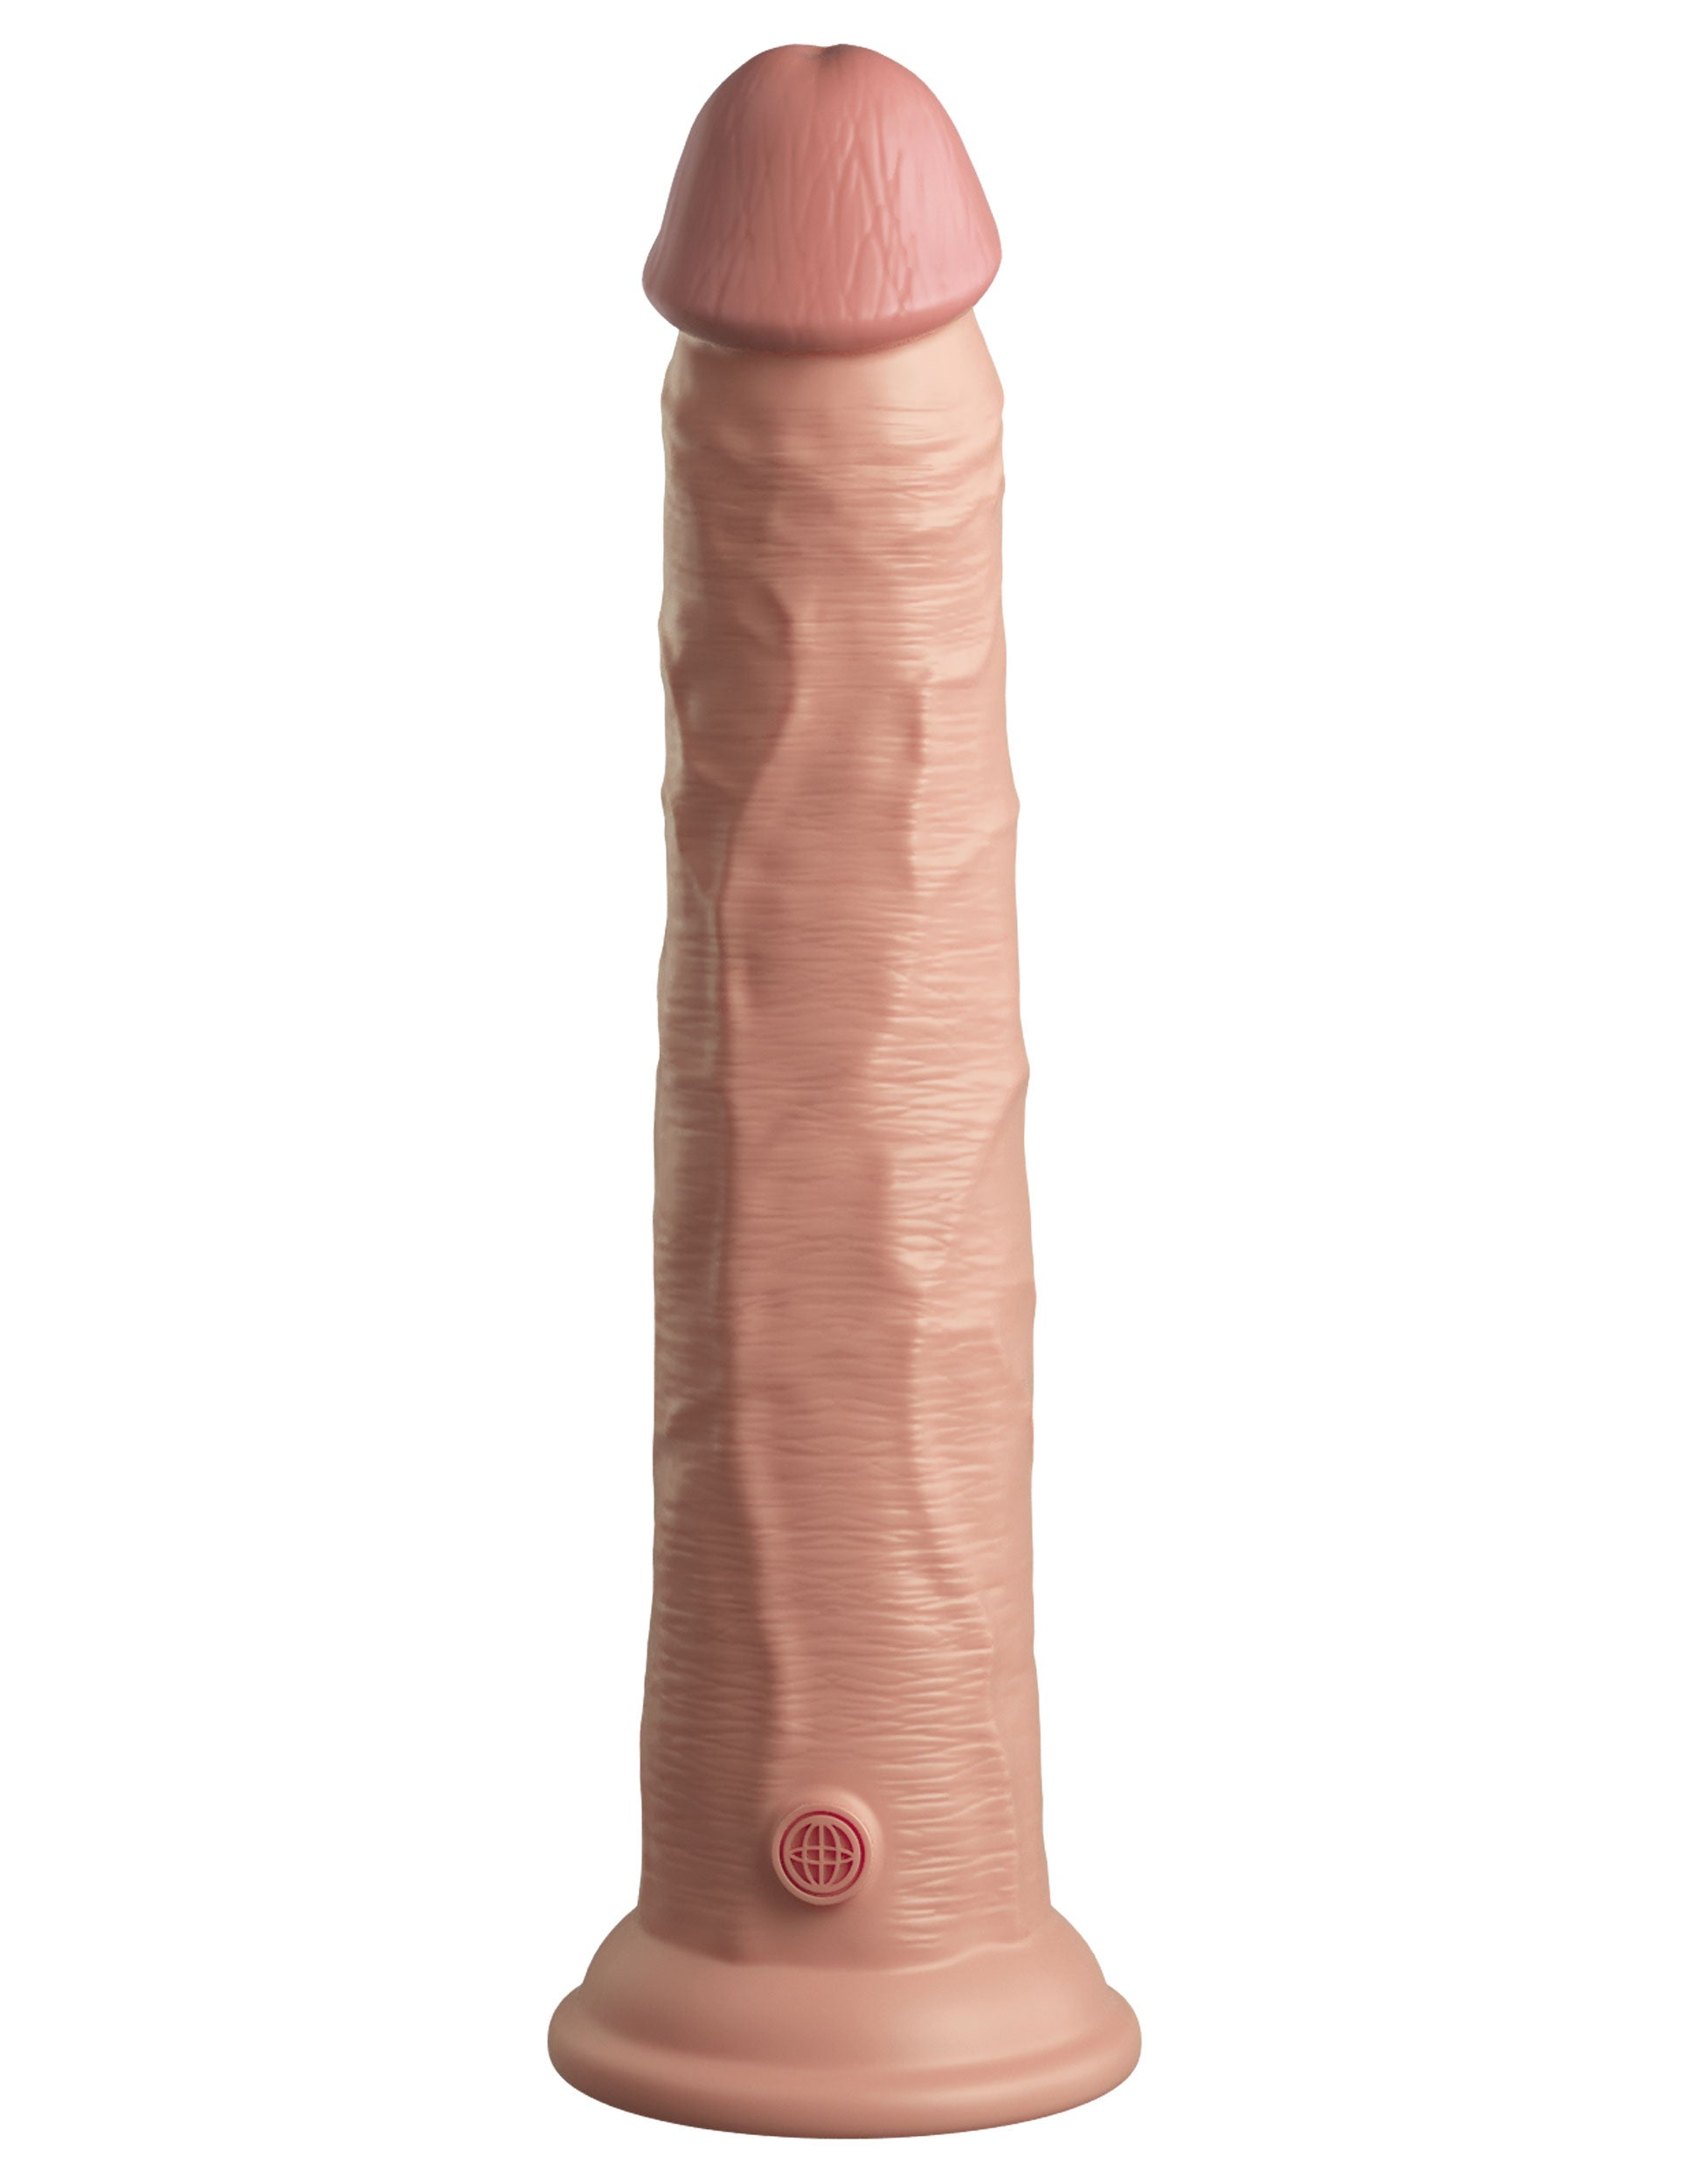 King Cock Elite 10 Inch Dual Density Silicone Cock - Light